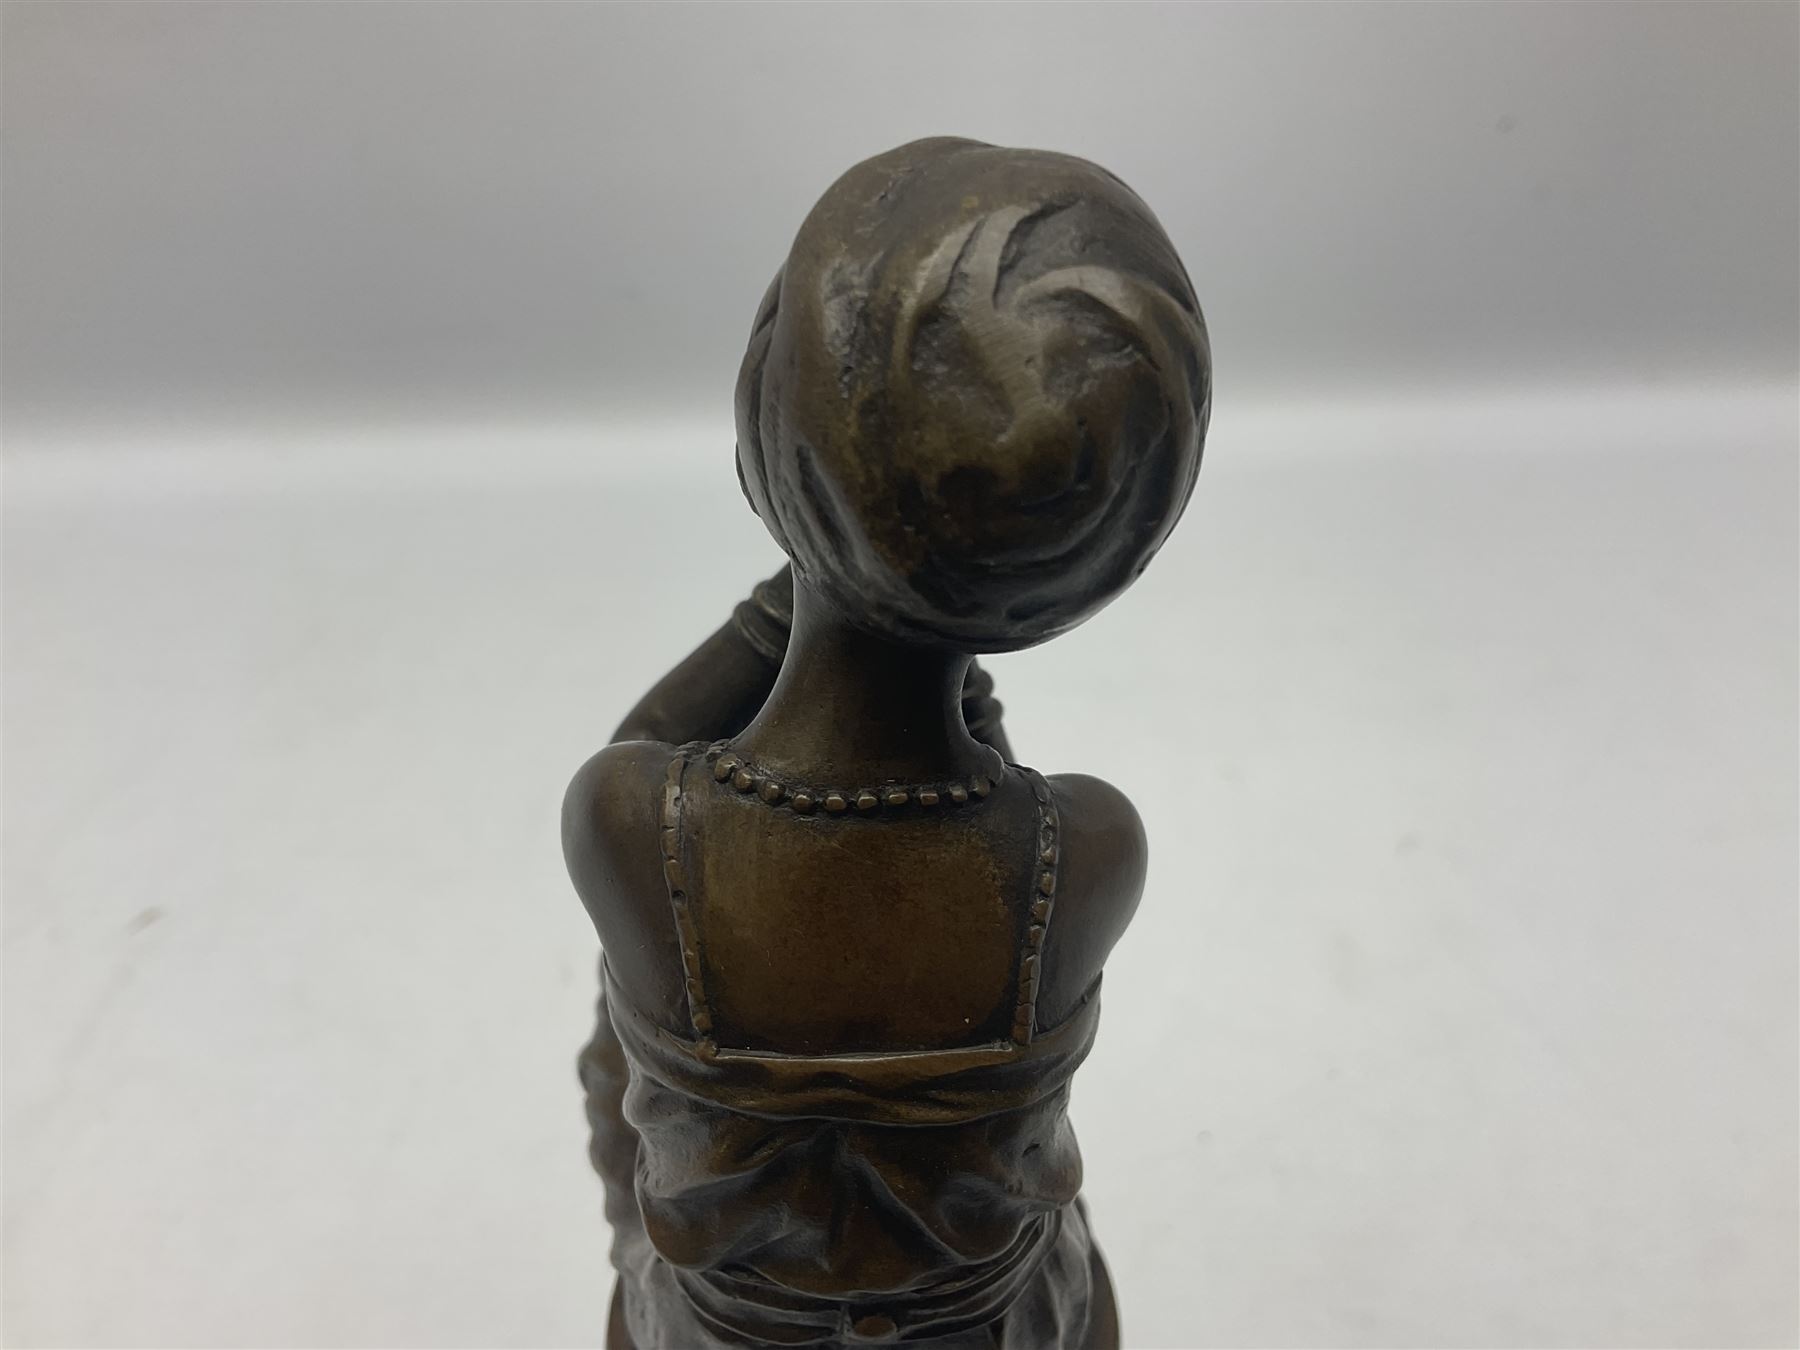 Art Deco style bronze figure of a lady seated on a stool applying lipstick - Image 4 of 7